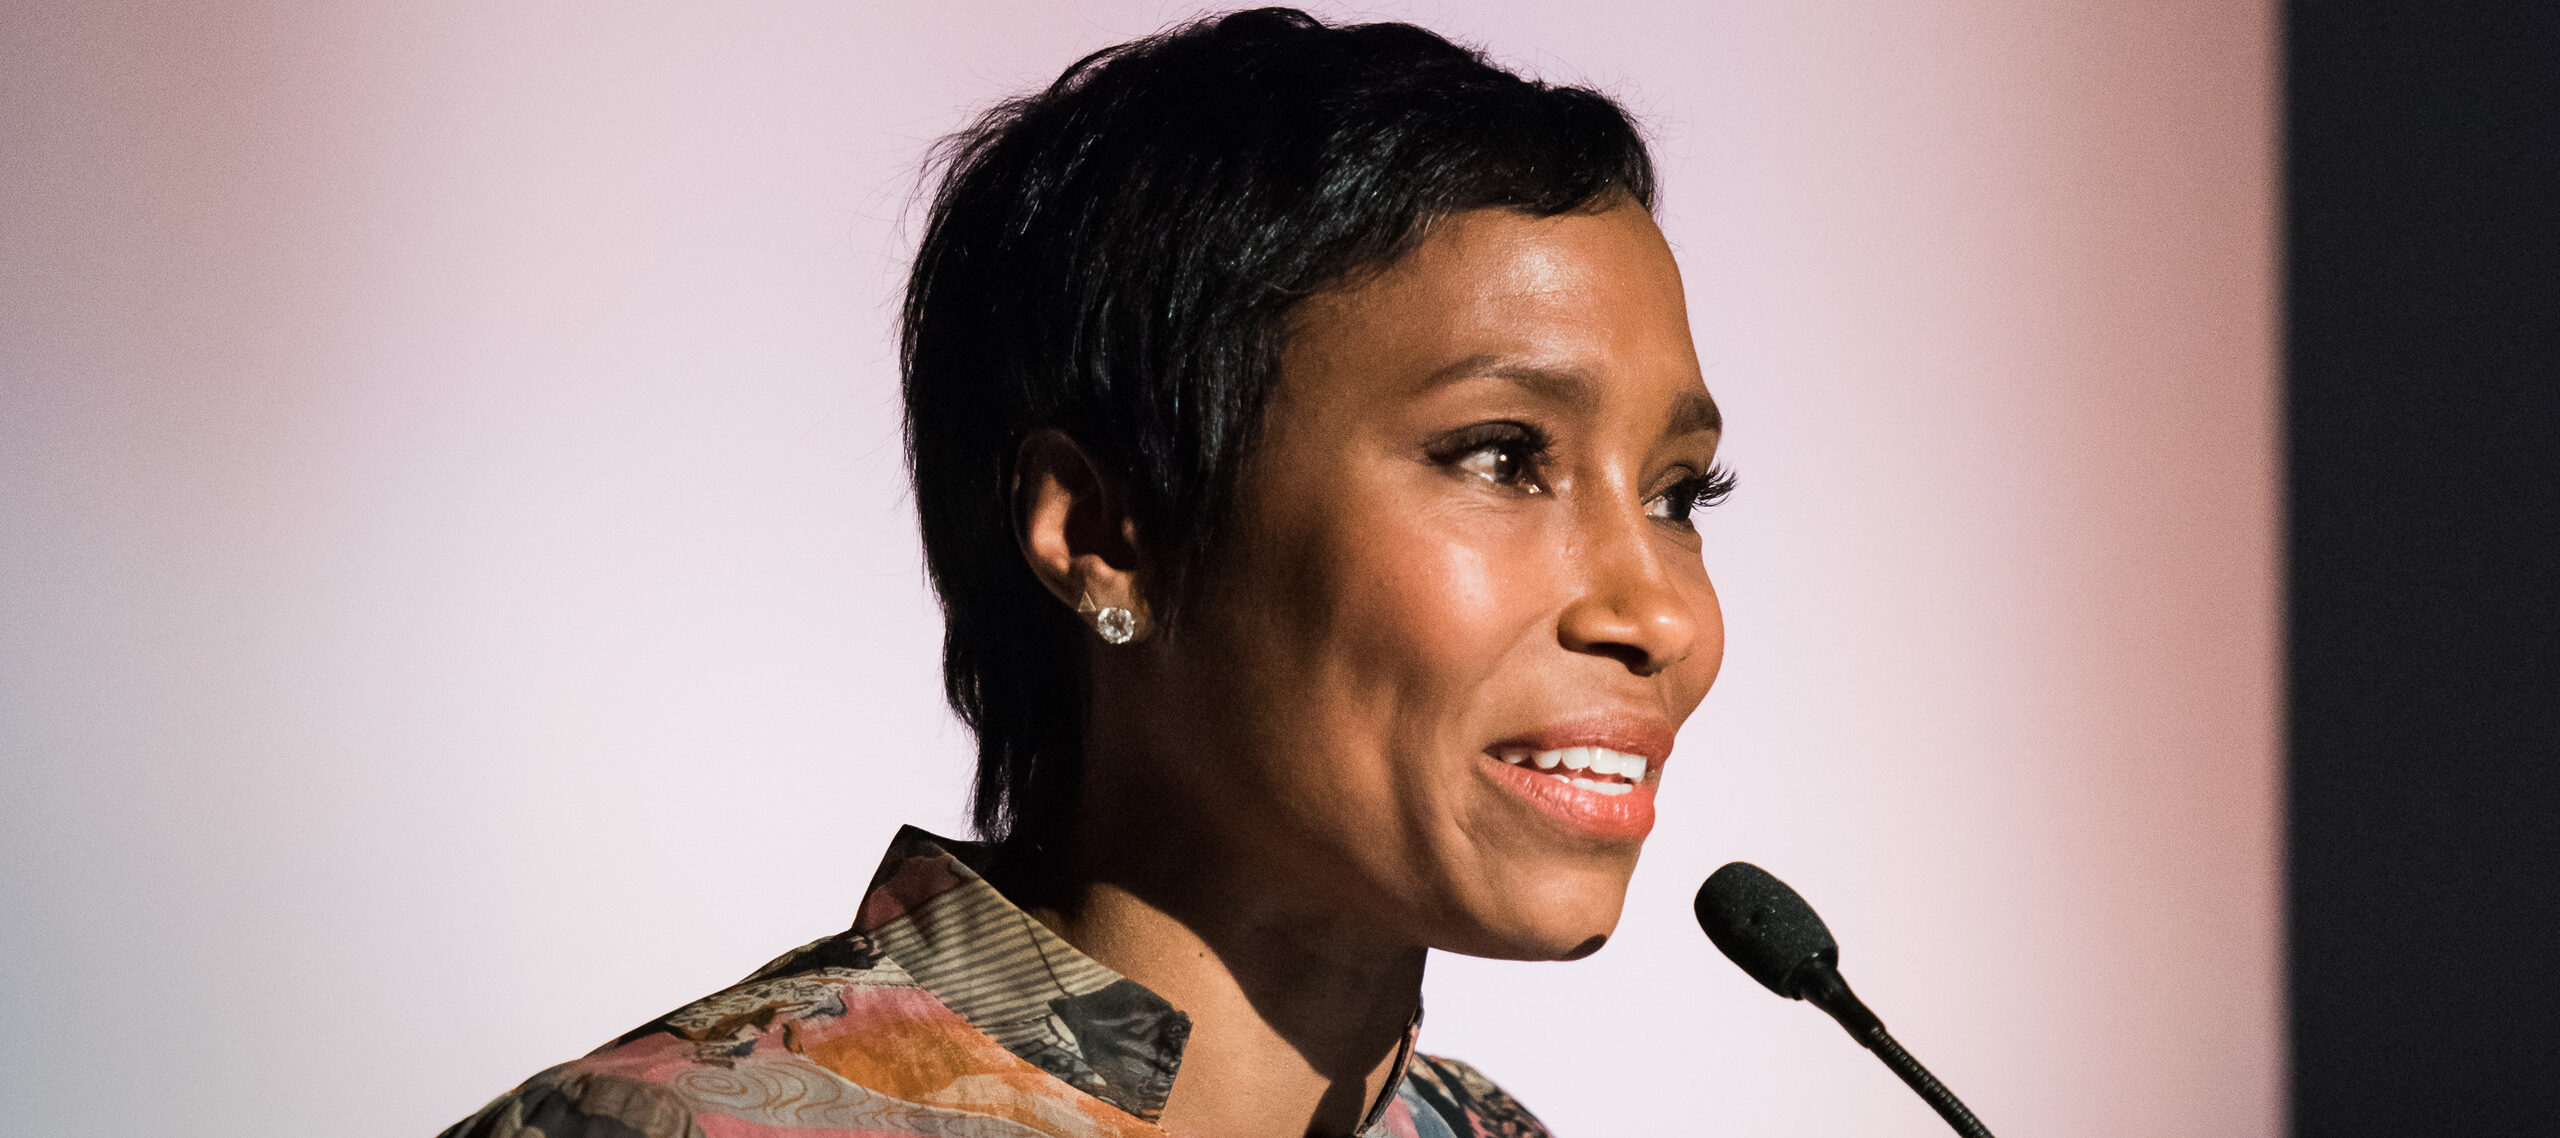 A dark-skinned woman with short cropped hair speaks into a microphone at a podium. Behind her a banner reads 